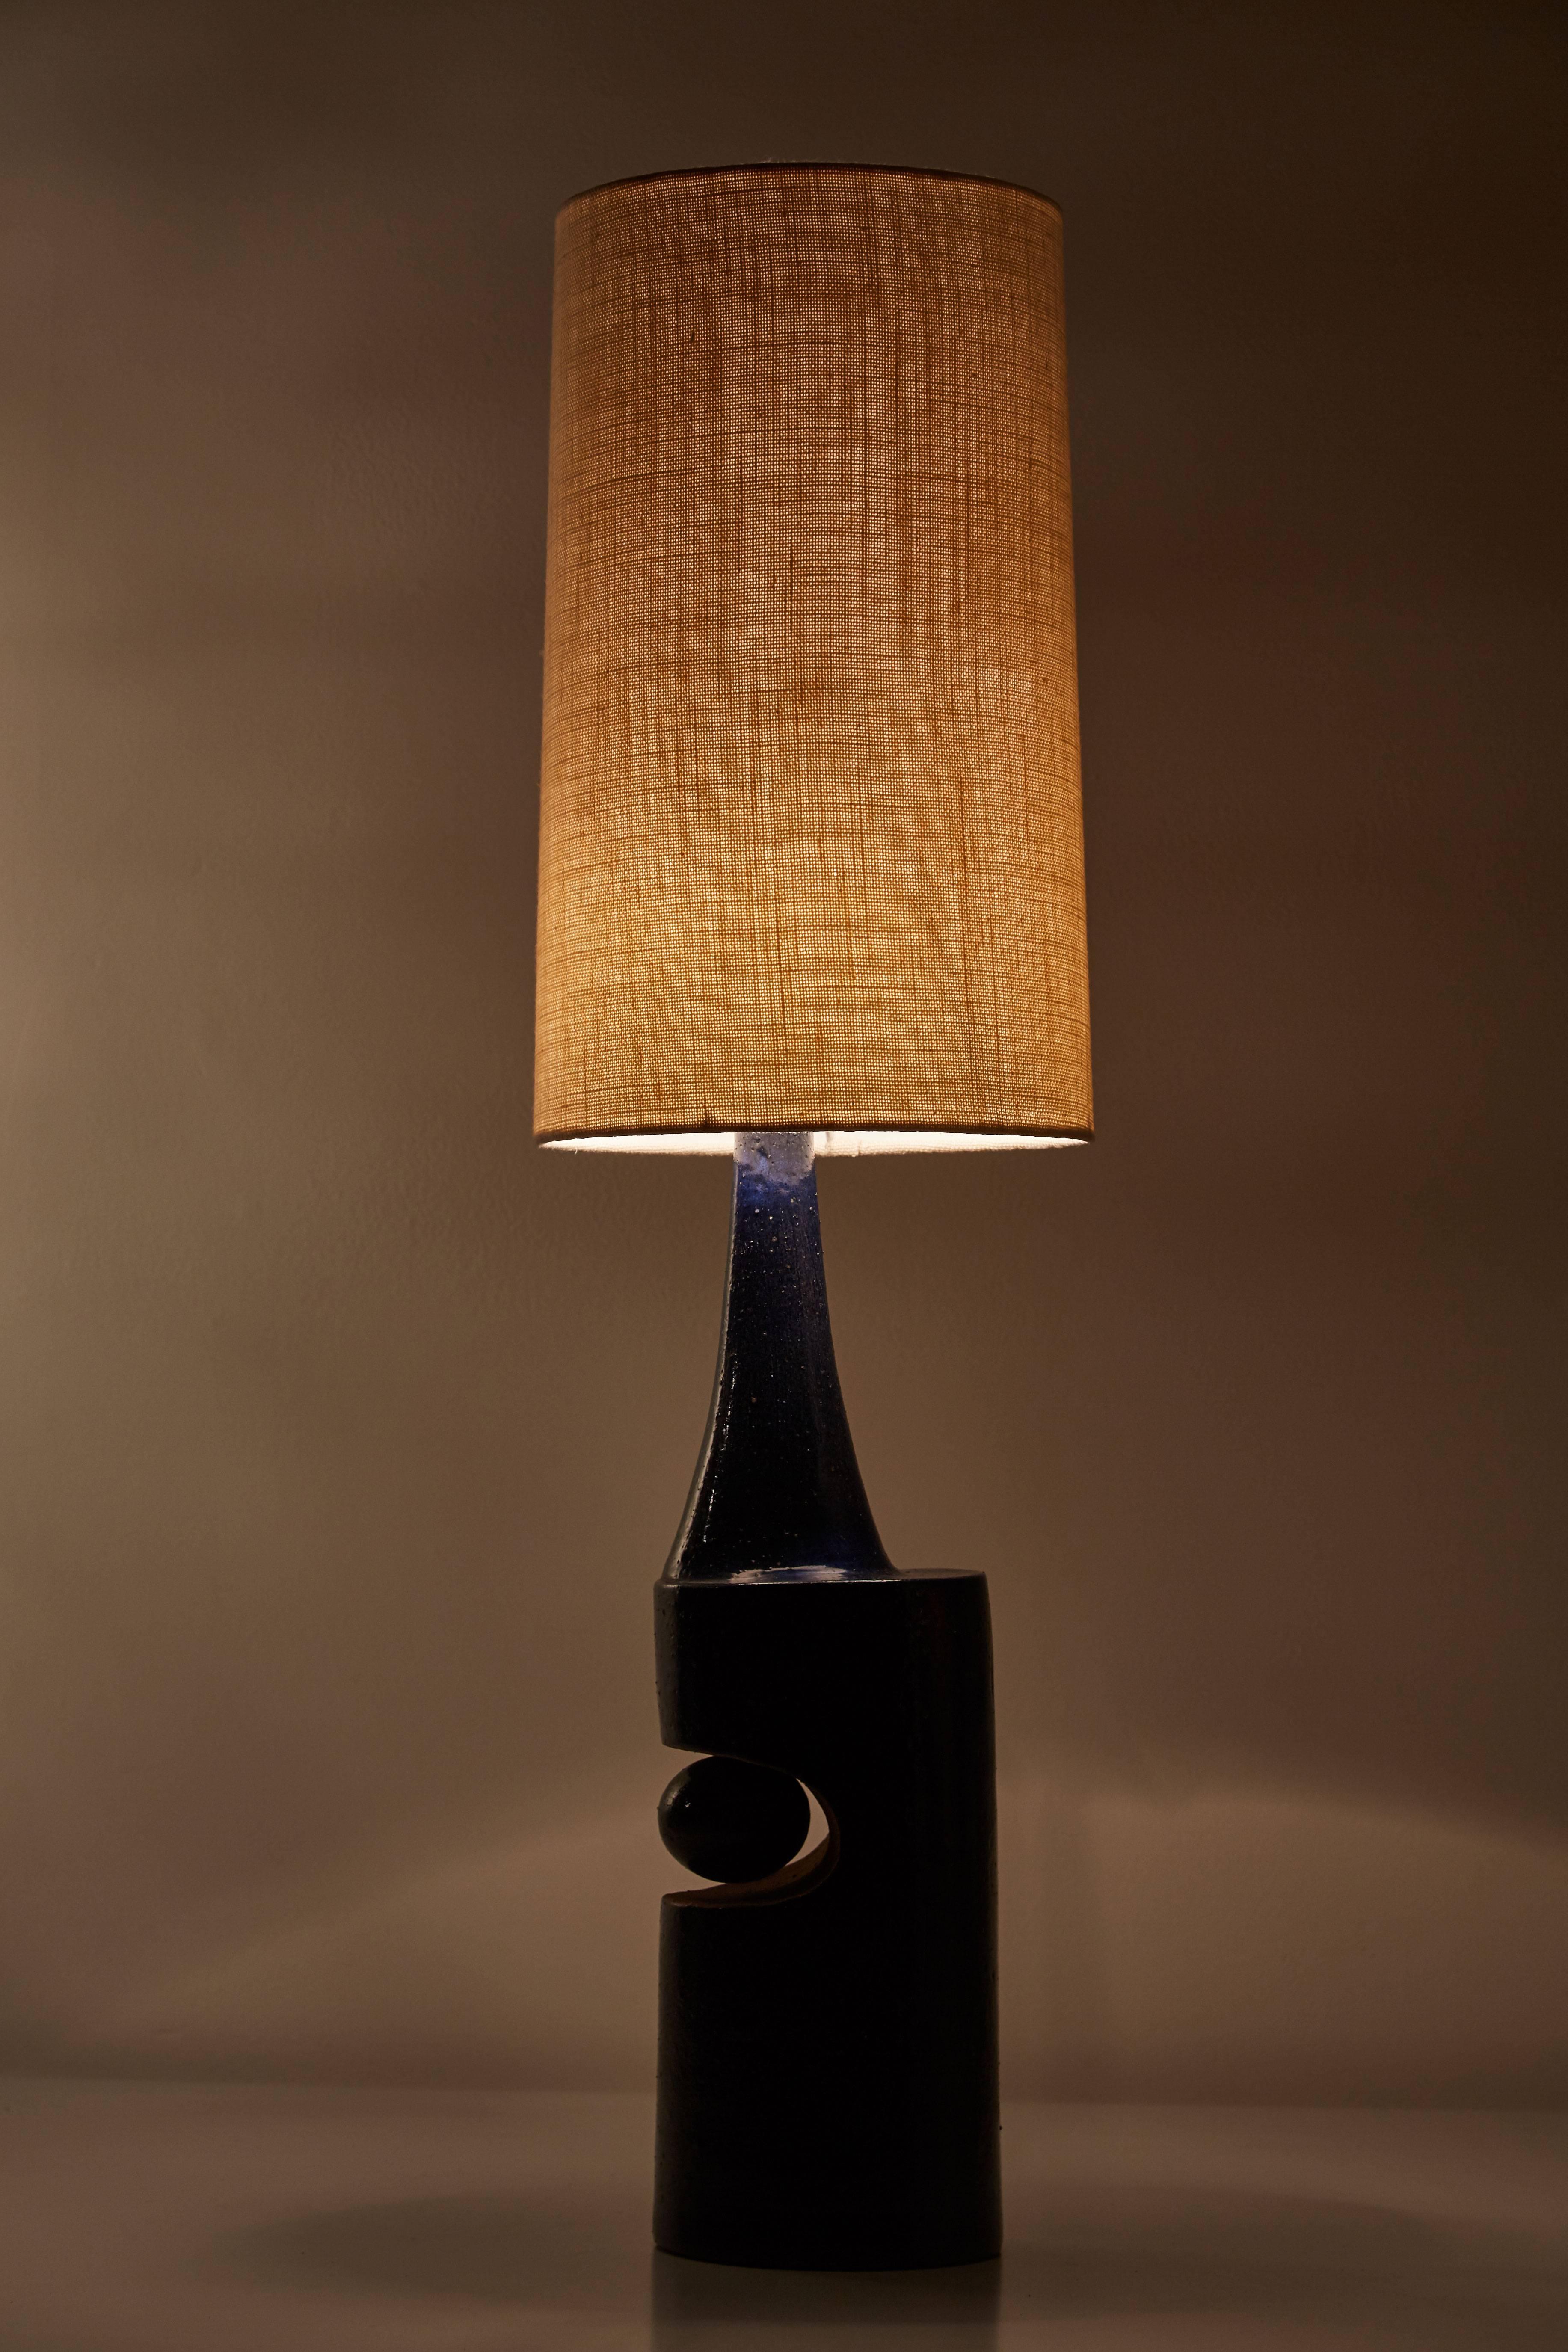 Danish glazed ceramic stoneware table lamp designed in Denmark, 1975. Signed and dated vintage 1975. Custom linen shade. Original cord. Takes one European 75w maximum bayonet bulb. Height displayed is for fixture only, shade not included.